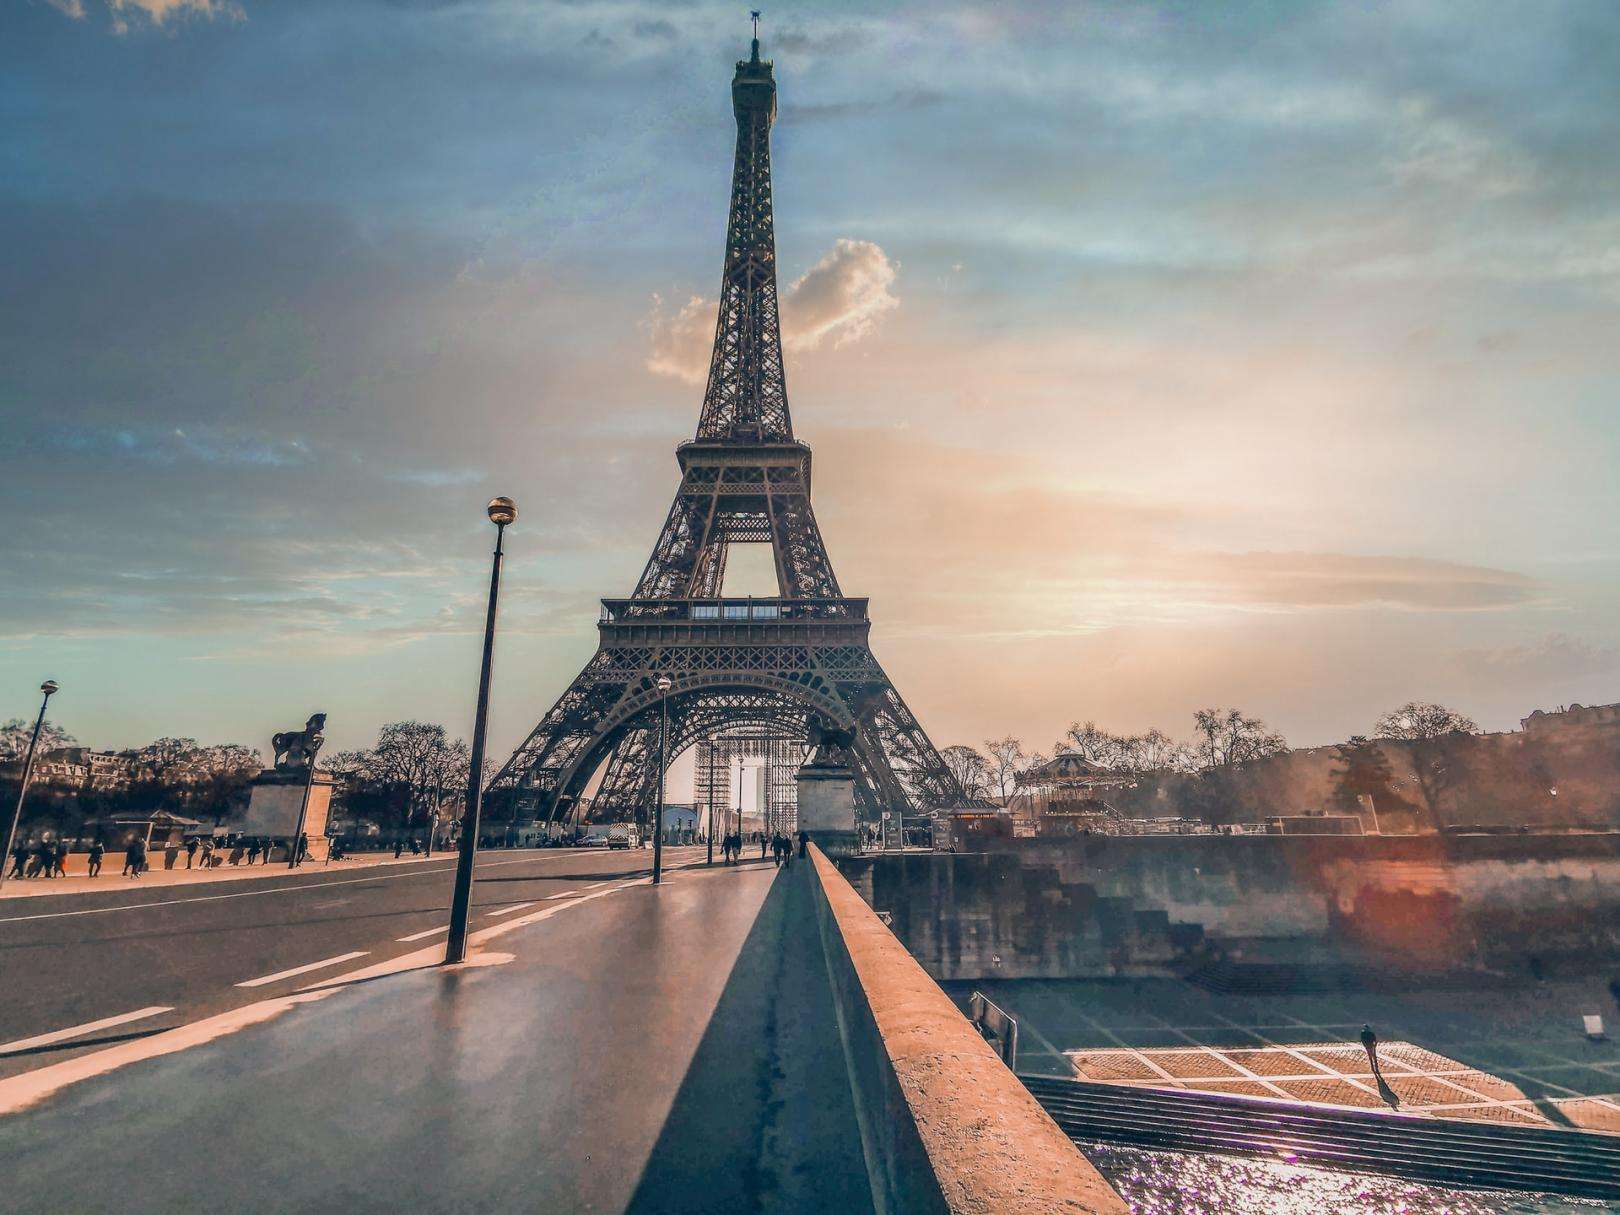 The Eiffel Tower gets a makeover